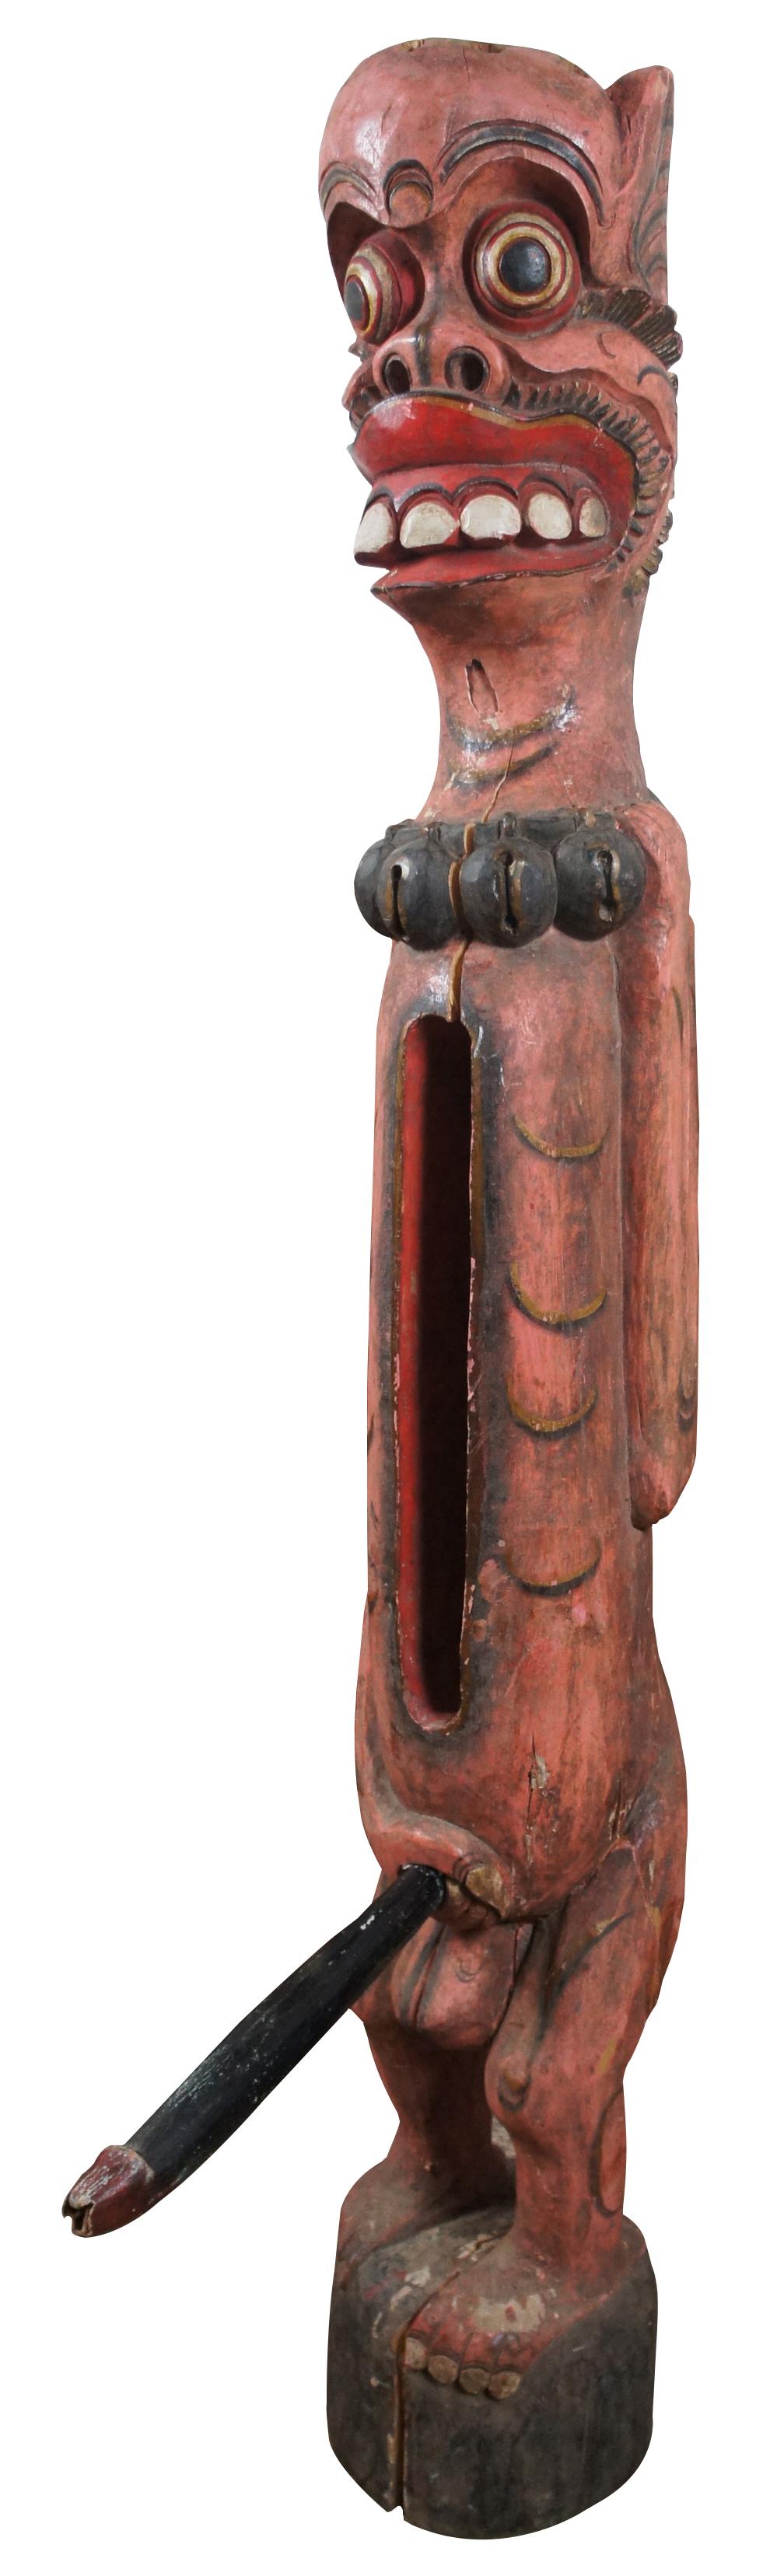 Vintage Indonesian hand carved wooden slit drum / tribal fertility figure painted in red and black with bells around it’s neck and open space in the torso to store the detachable phallus / penis.

Measures: 8” x 8” x 55.5” / Phallus - 12.75” x